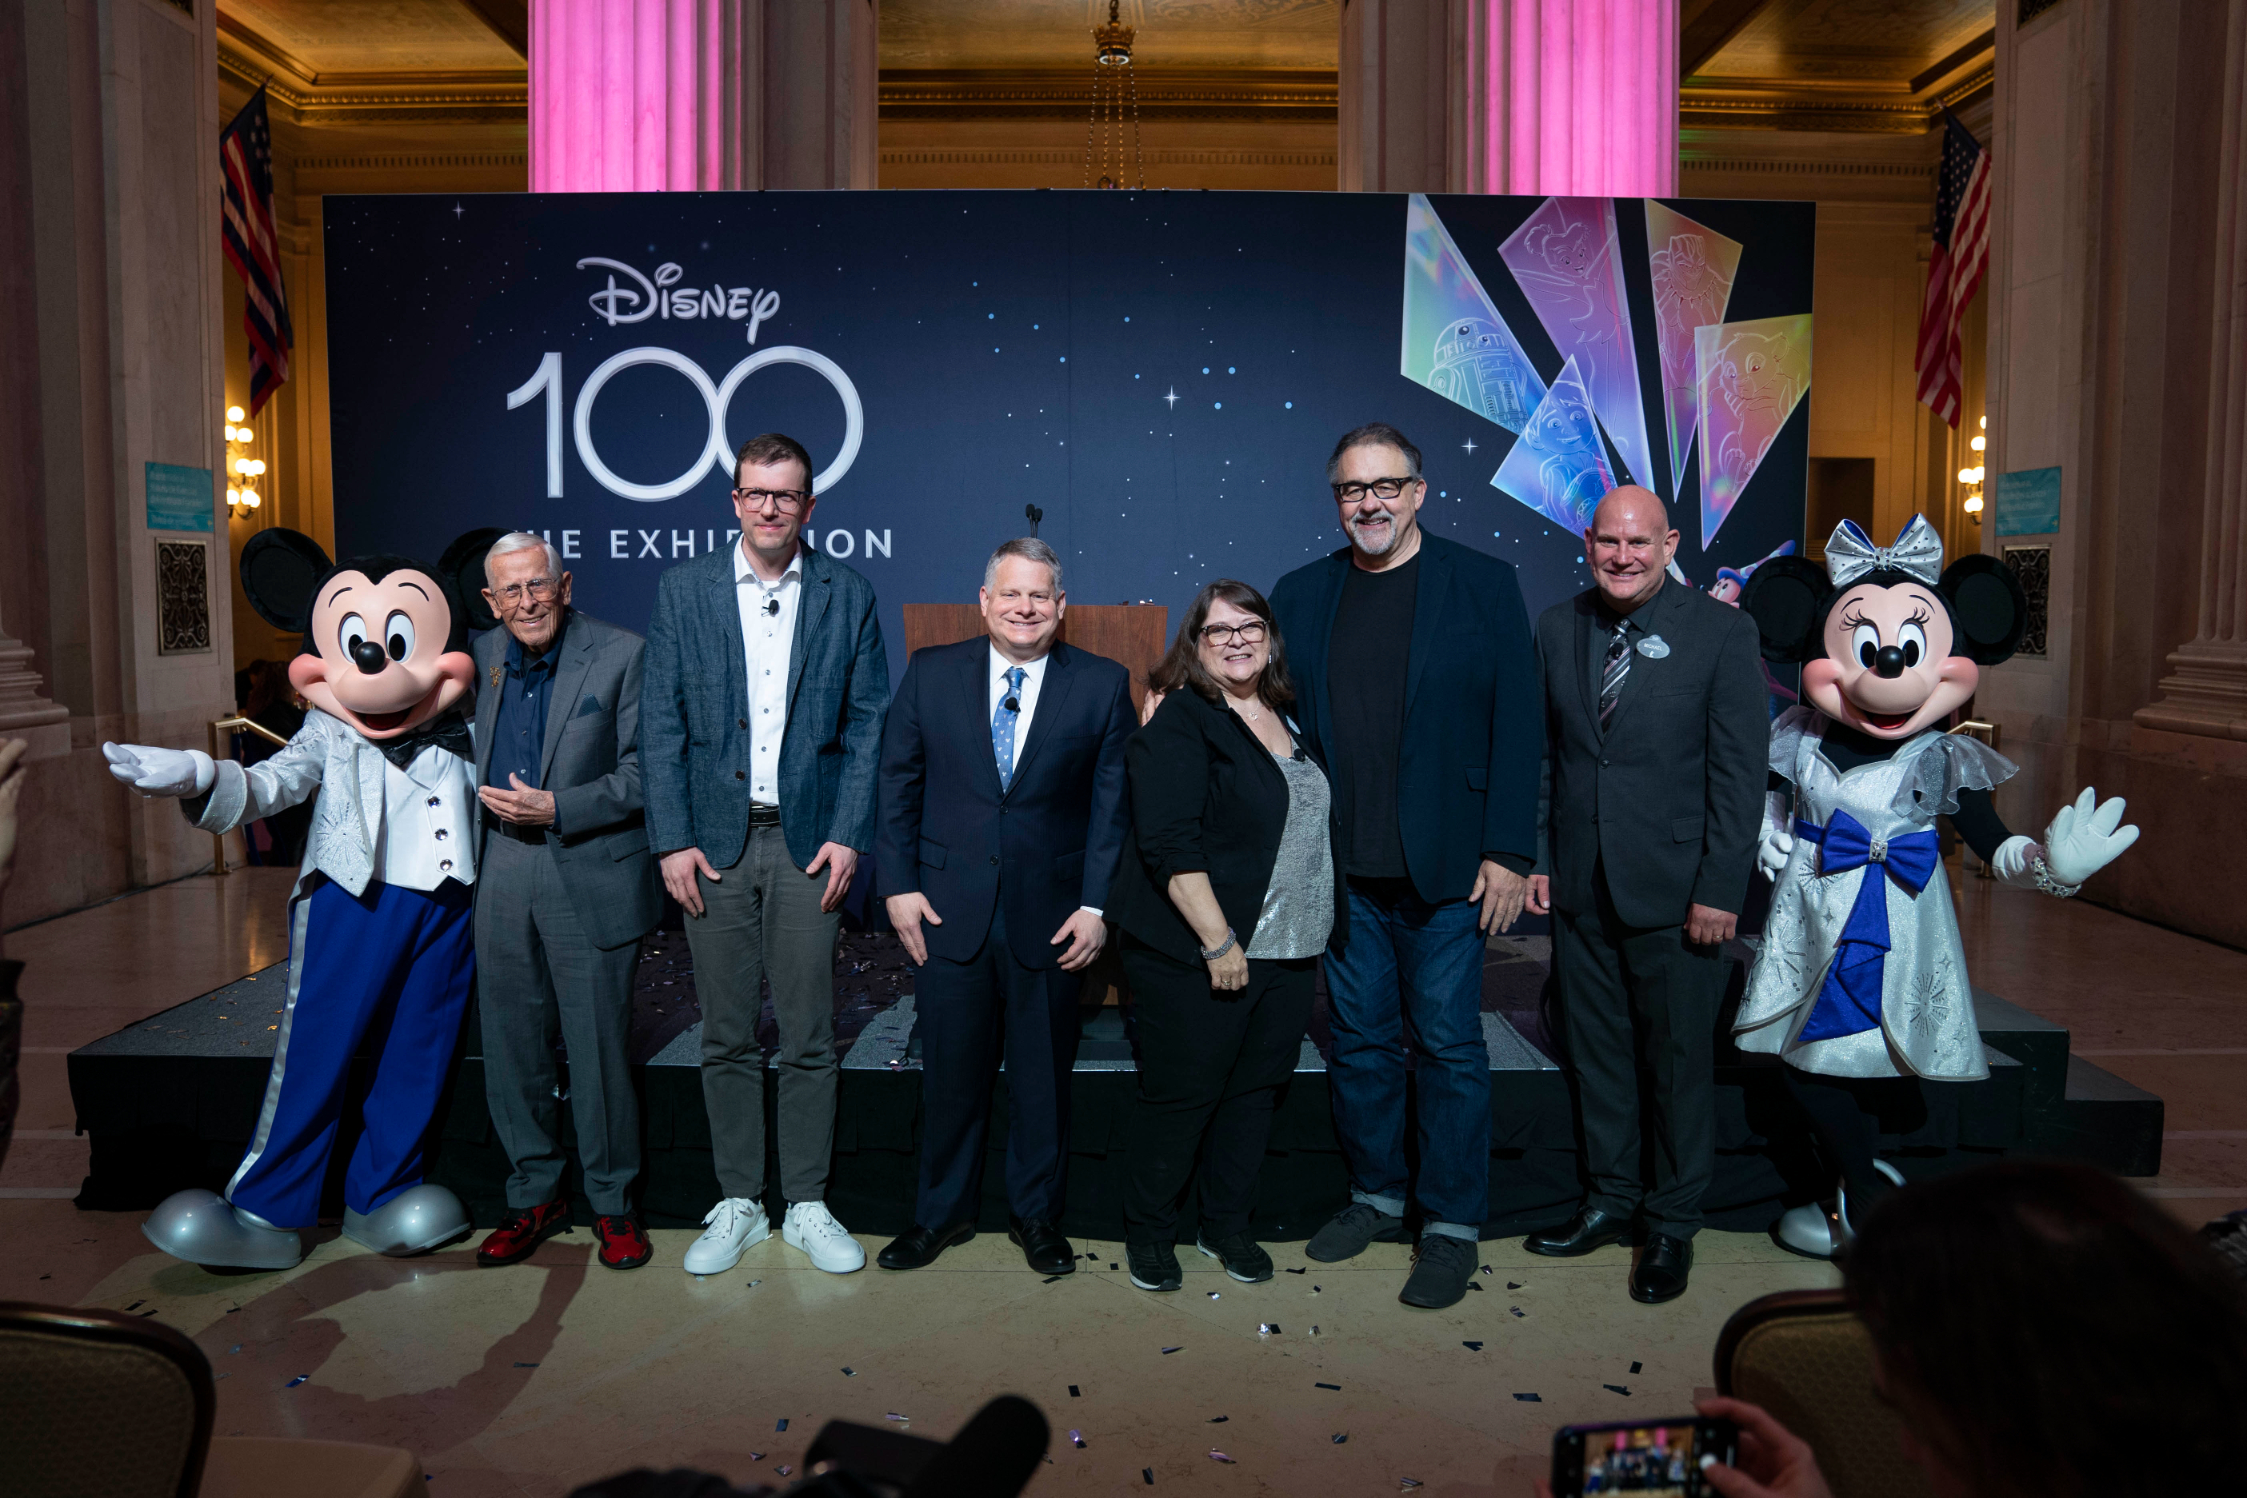 Mickey and Minnie at the DIsney 100 Exhibition (L to R): Mickey Mouse, Disney Legend Bob Gurr, Semmel Exhibitions Executive Producer and Director Christoph Scholz, The Franklin Institute President and CEO Larry Dubinski, Walt Disney Archives Director Becky Cline, Disney Legend Don Hahn, Walt Disney Archives and D23: The Official Disney Fan Club Vice President Michael Vargo, Minnie Mouse